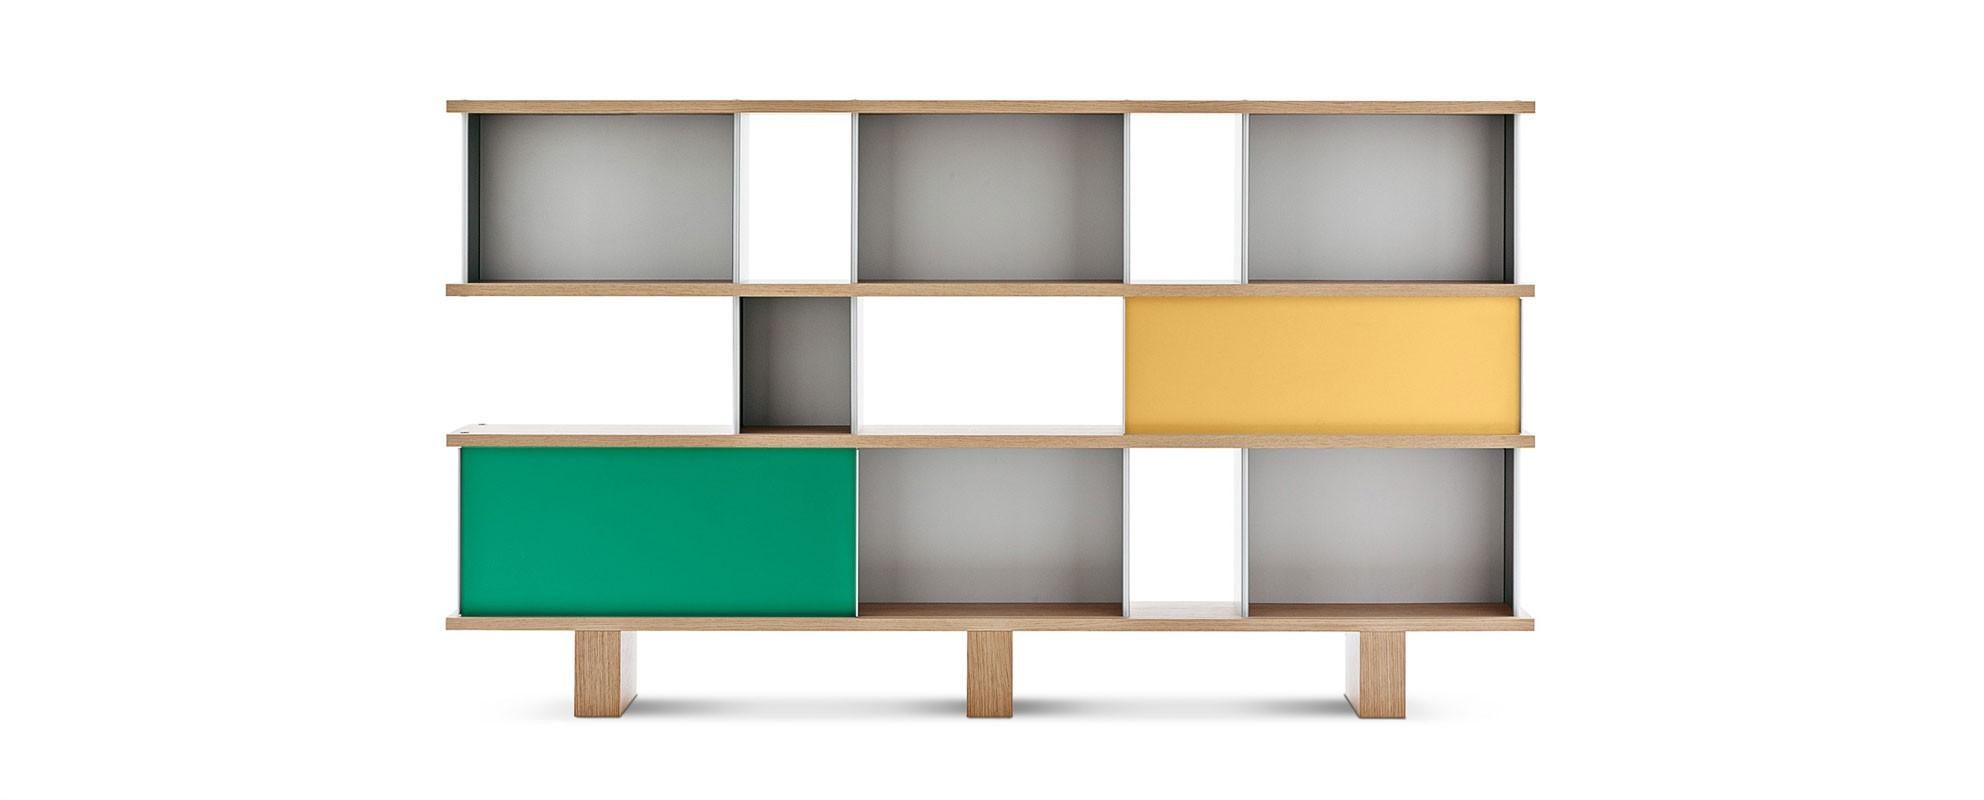 Charlotte Perriand Nuage Shelving Unit, Wood and Green, Yellow Aluminium In New Condition For Sale In Barcelona, Barcelona